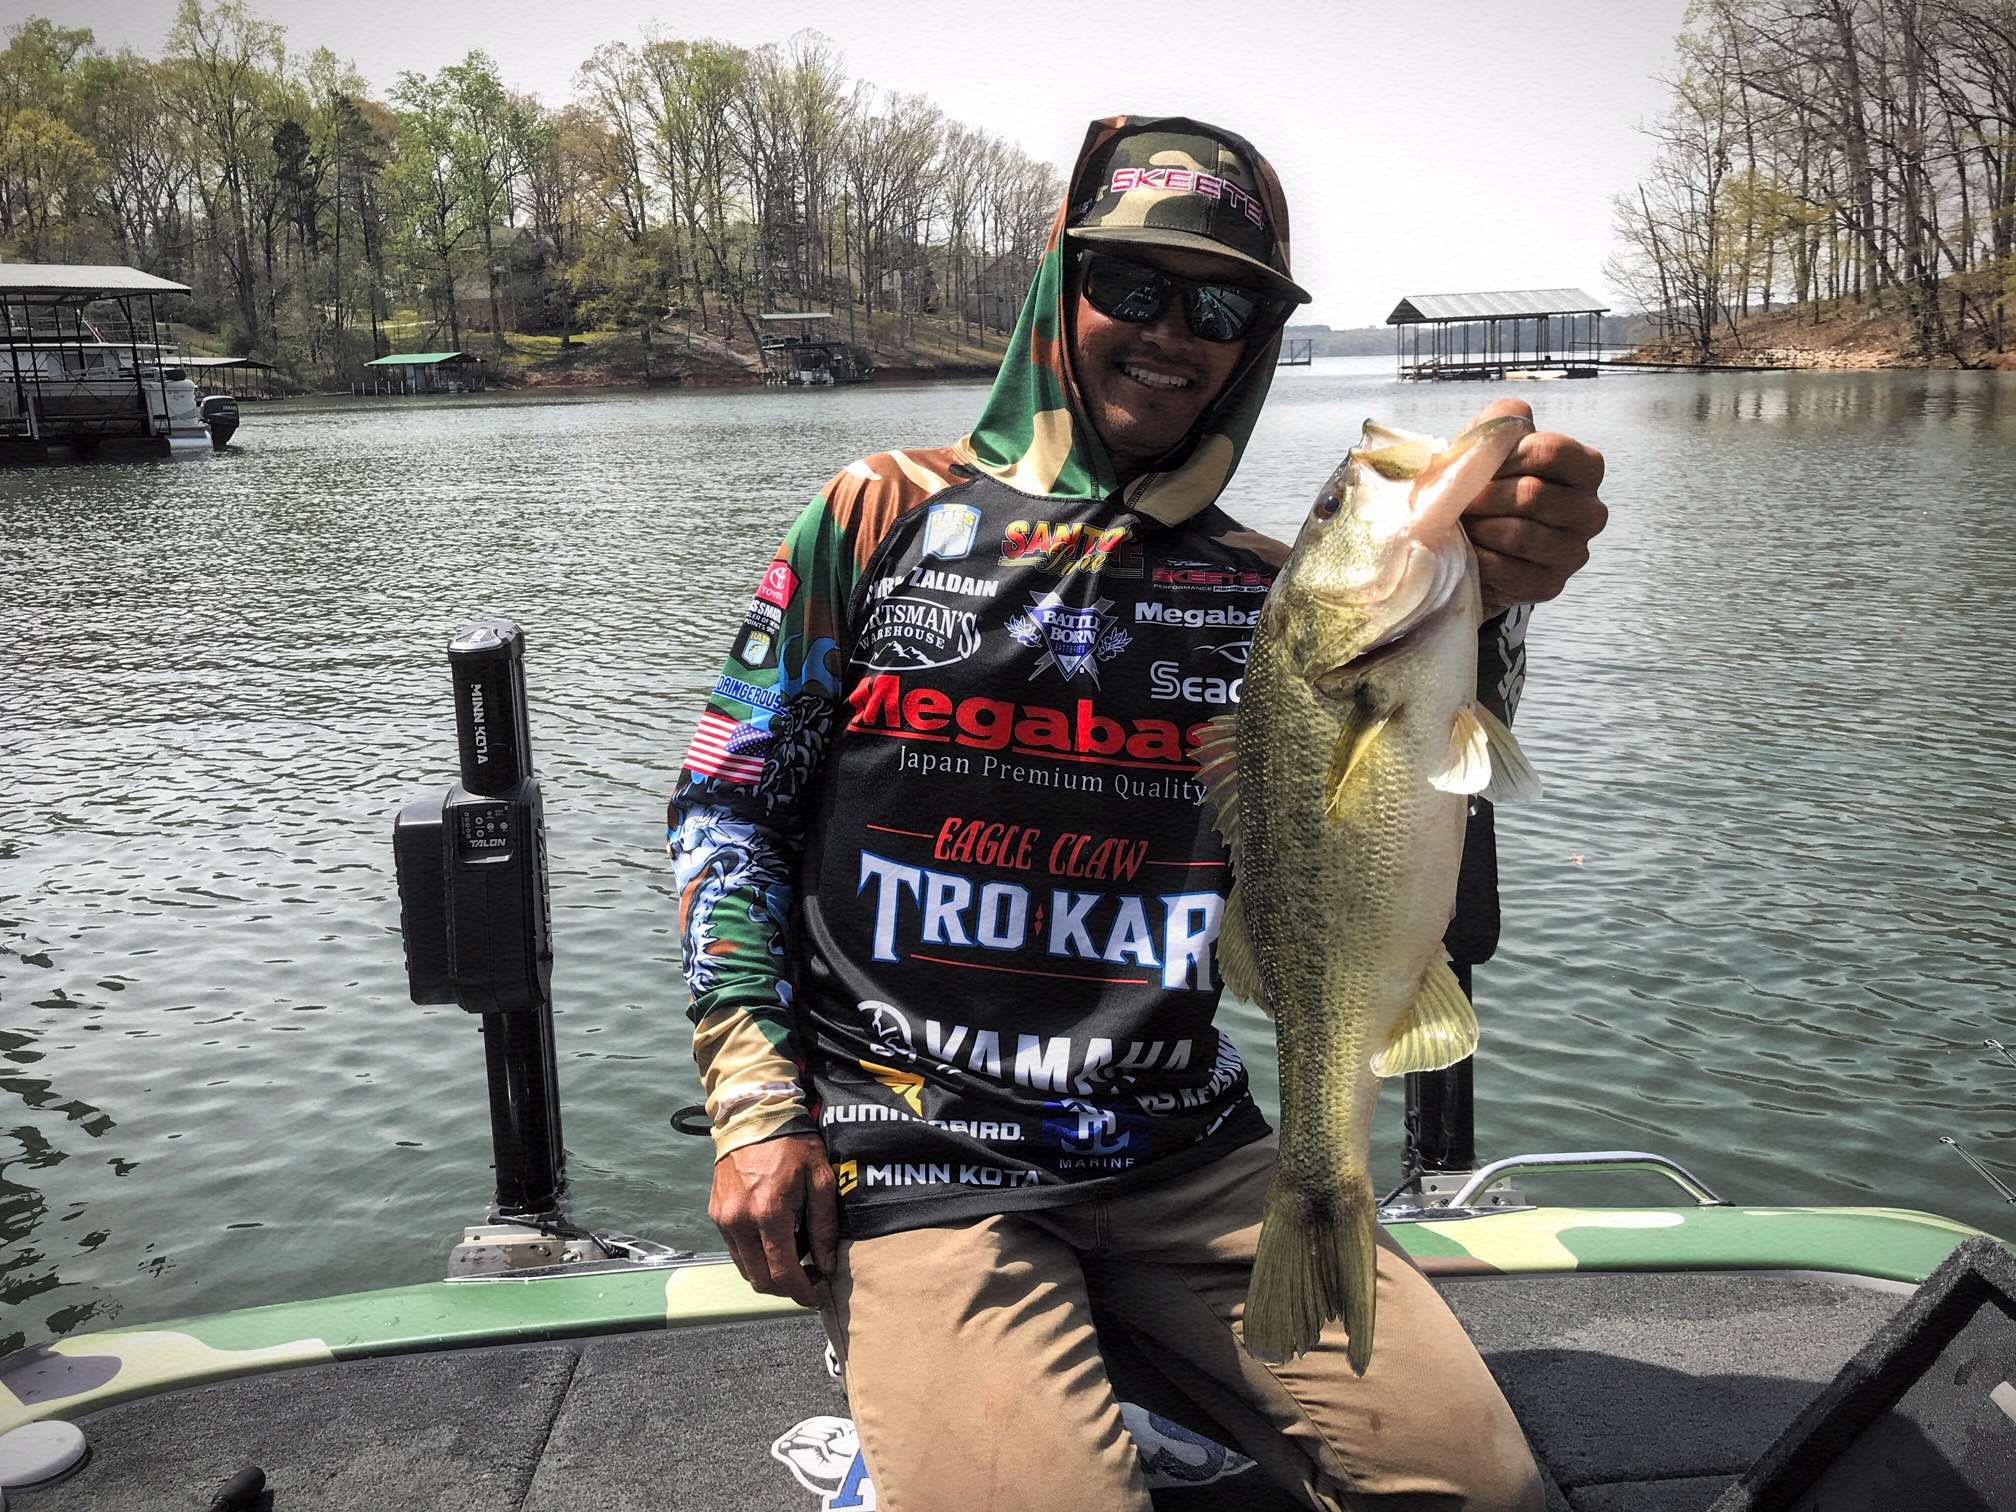 Things are starting to gain momentum for Chris Zaldain...2 1/2 and 3-pounder in two casts...not giant upgrades, but needed weight on the upturn.